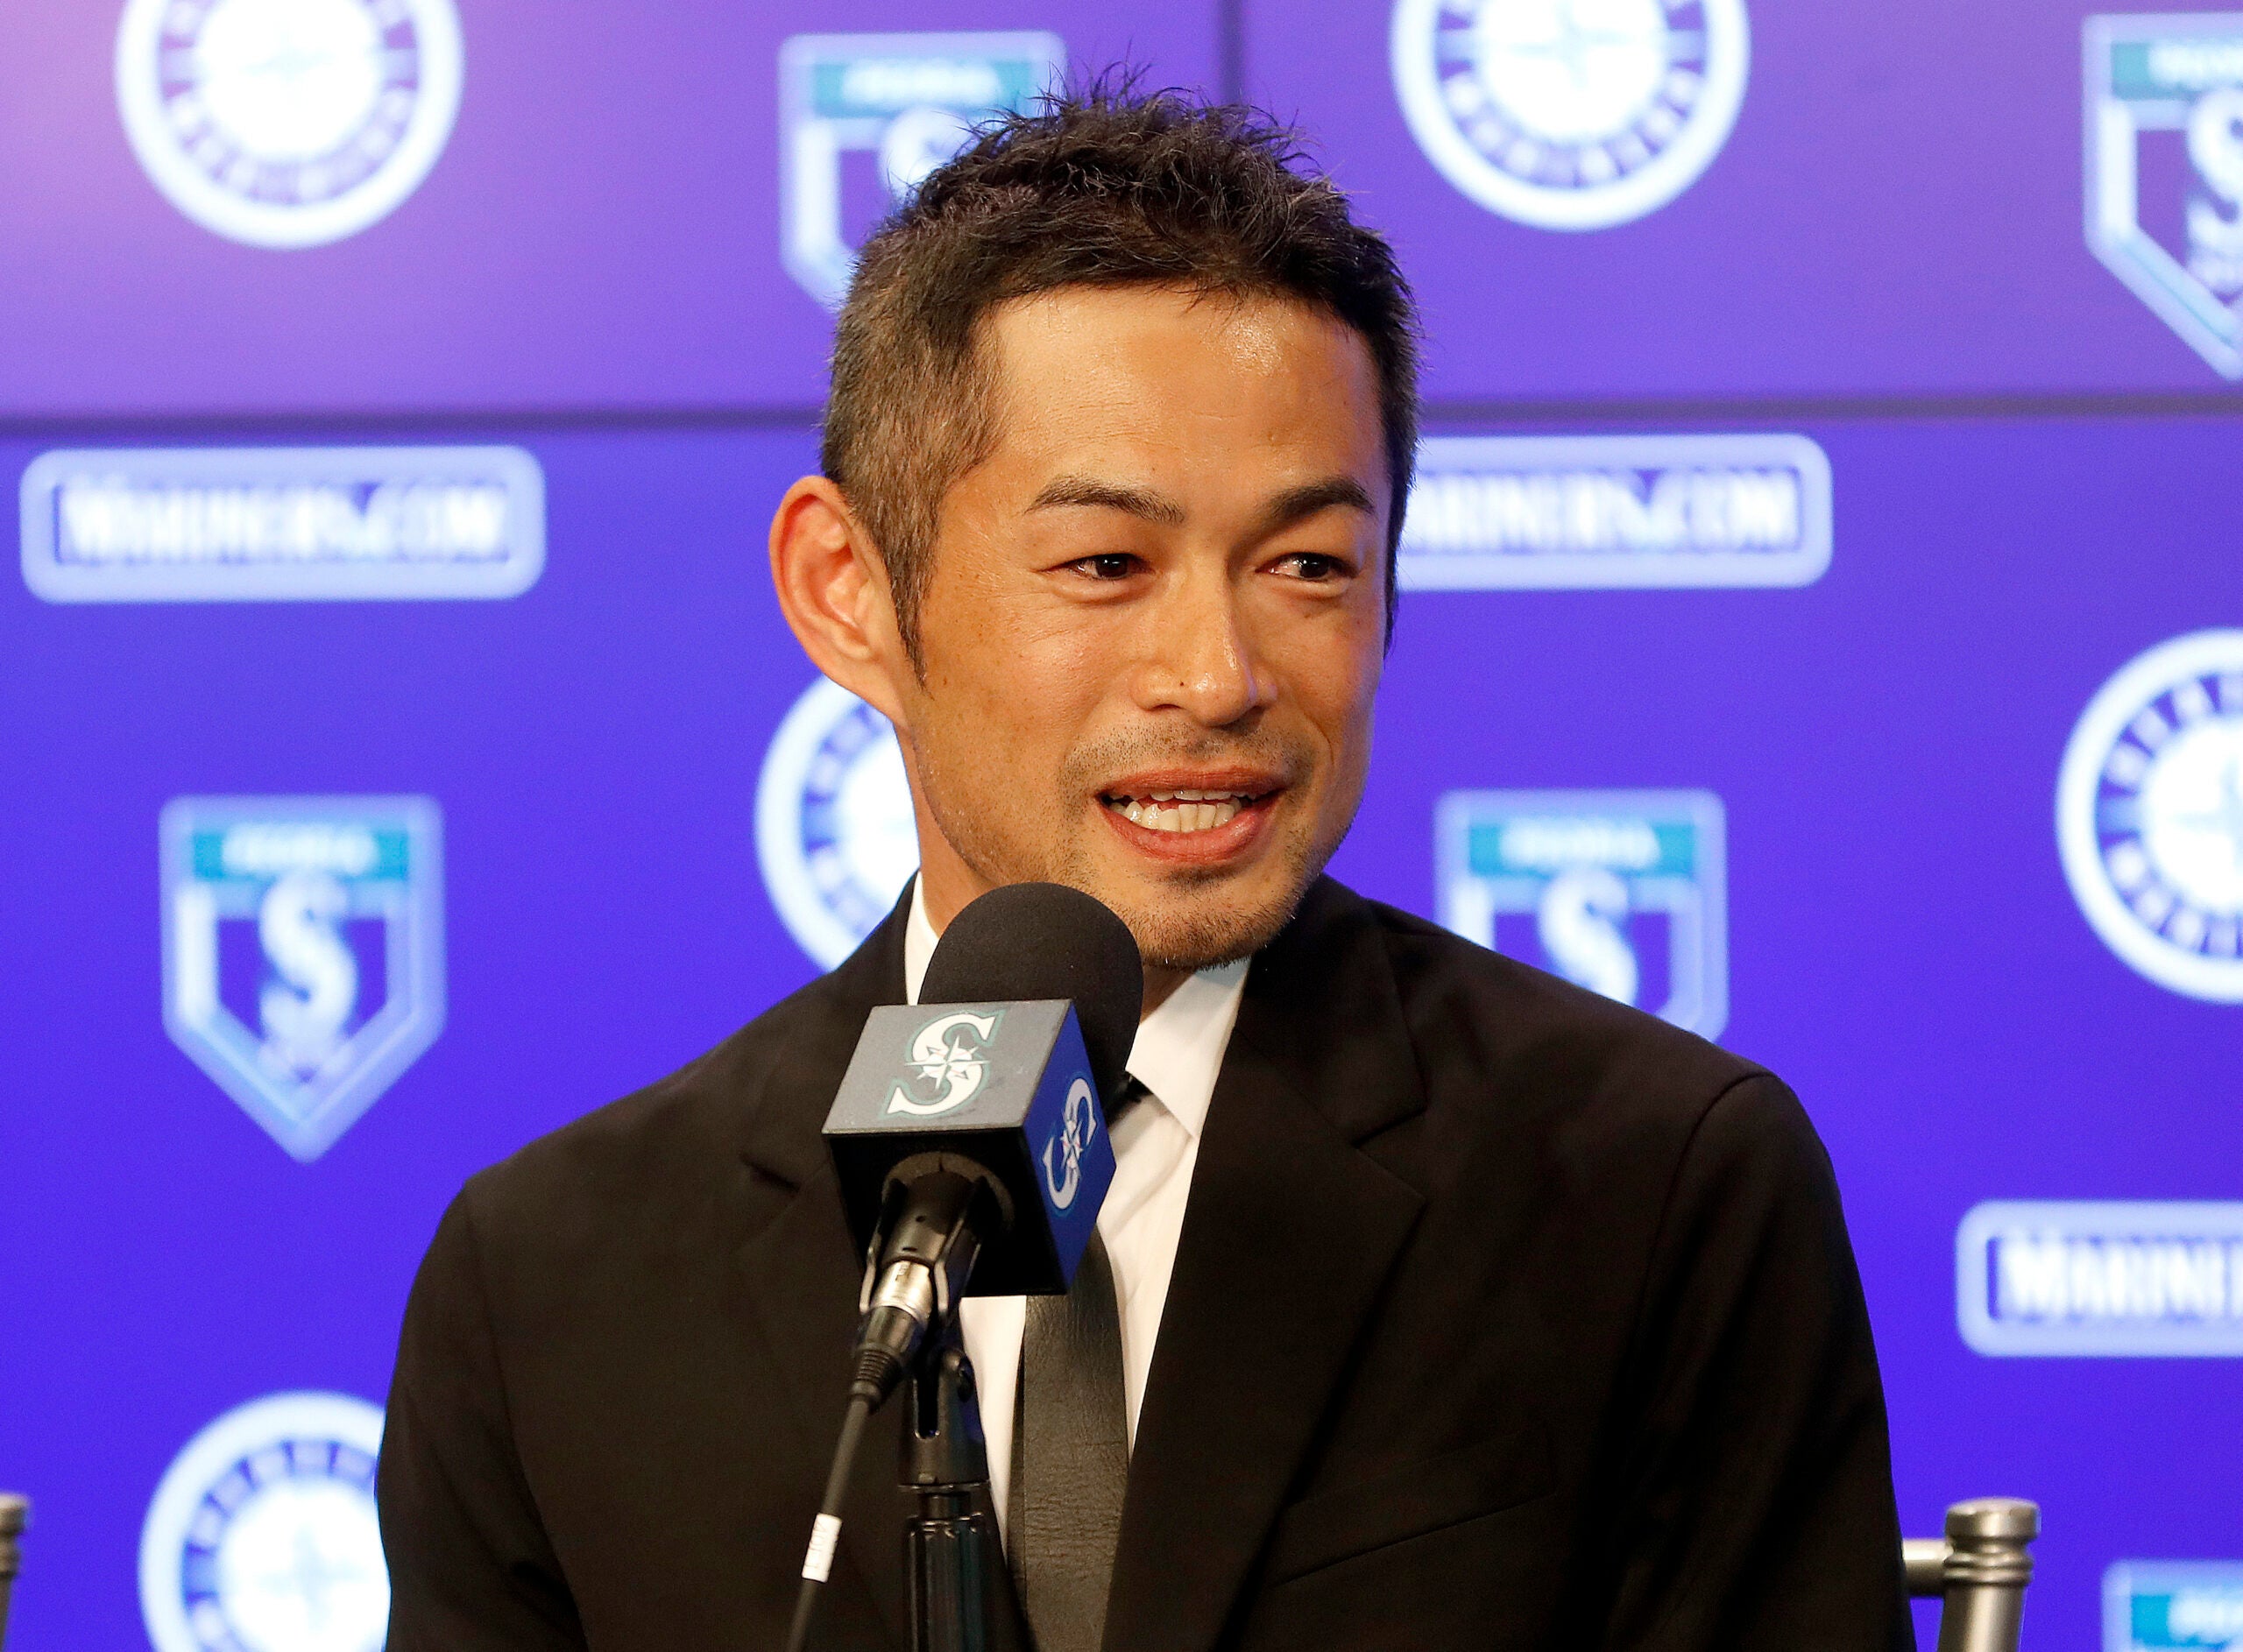 Ichiro's playing days over for 2018, moves to Mariners front